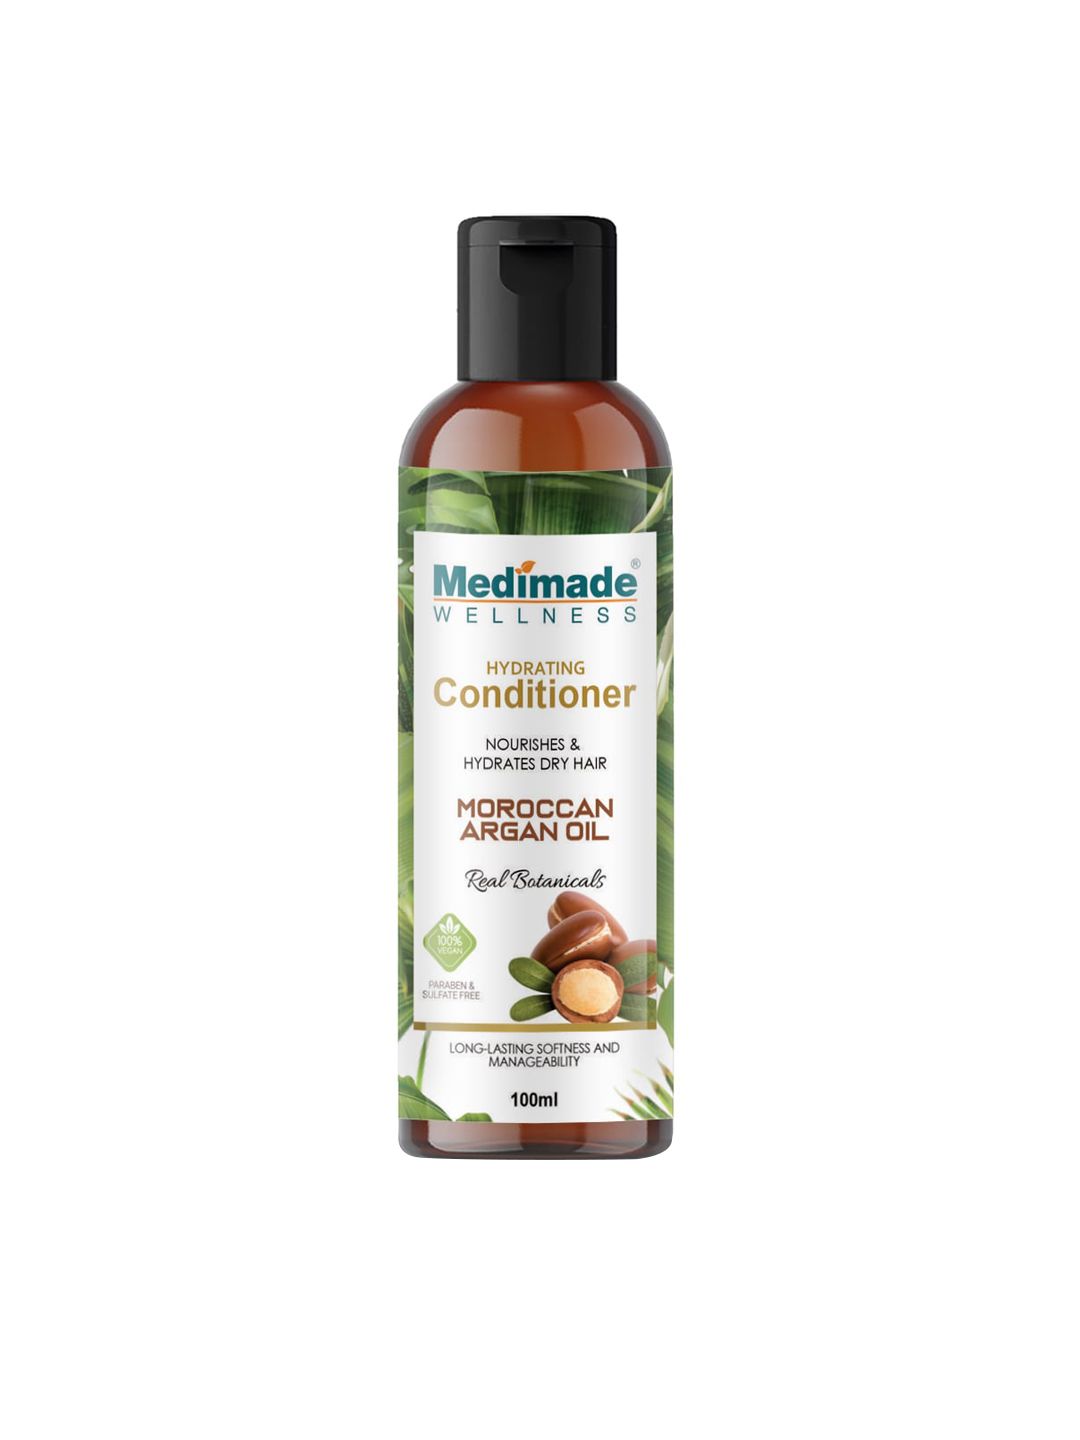 Medimade Hydrating Conditioner with Moroccan Argan Oil 100ml Price in India